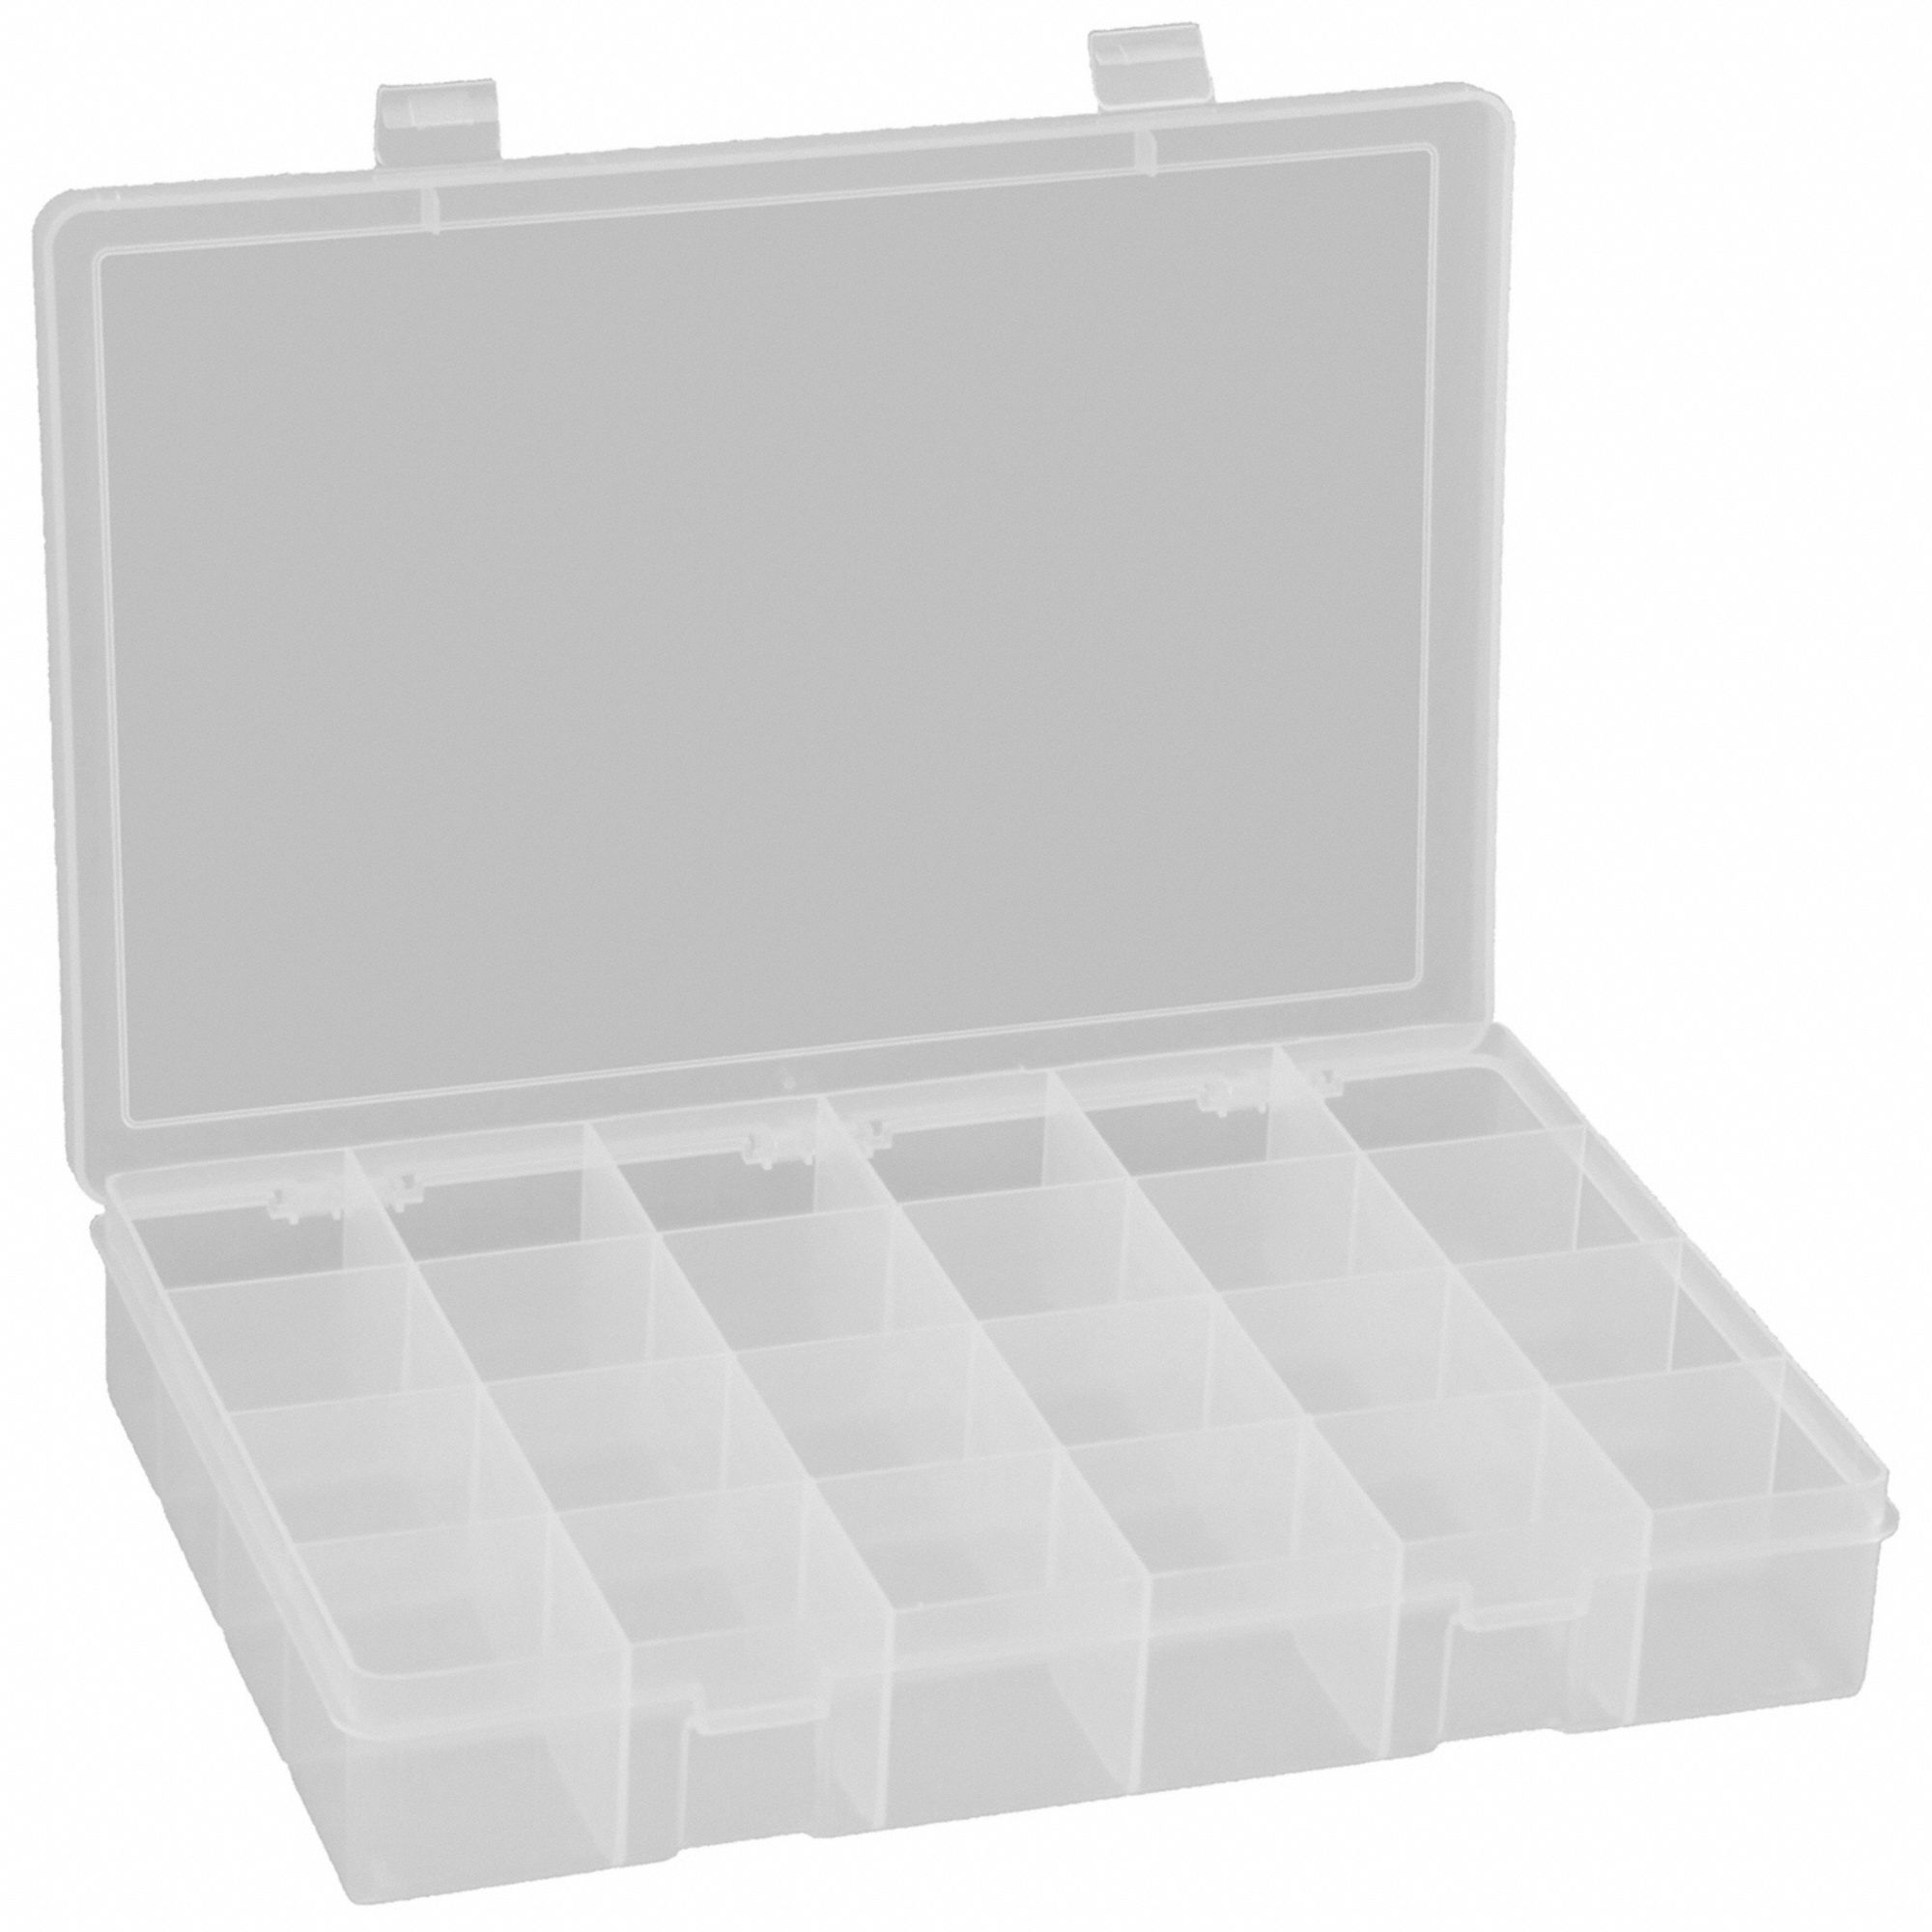  DURHAM Compartment Box - 13-1/4x9-1/4x2 - (24) Compartments -  With Fixed Dividers, Lot of 6 : Tools & Home Improvement